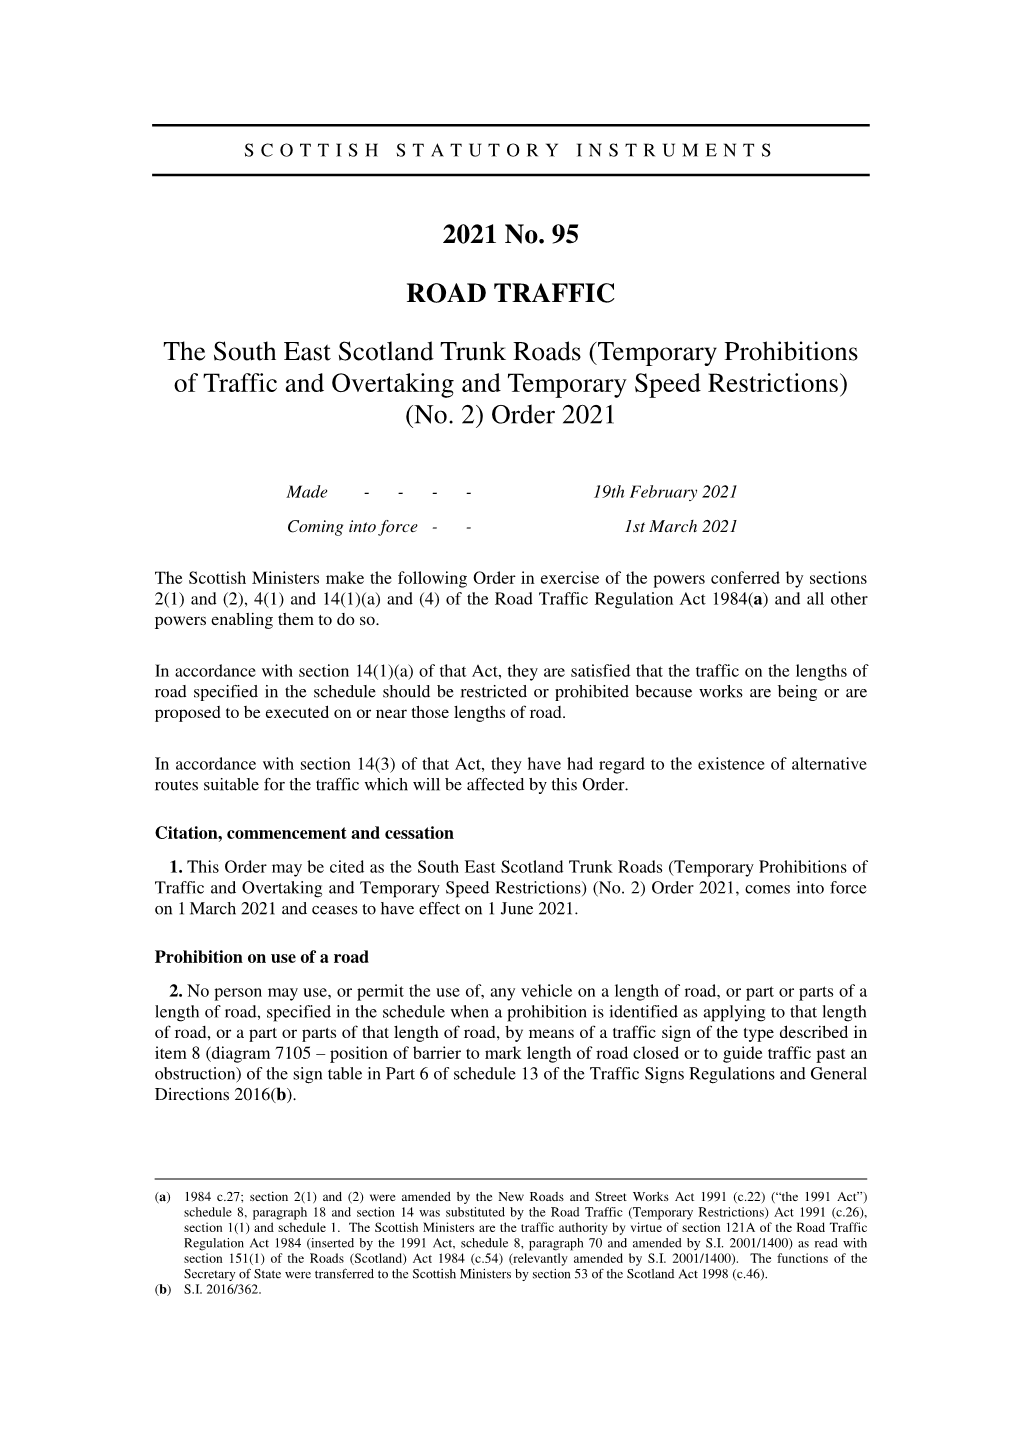 2021 No. 95 ROAD TRAFFIC the South East Scotland Trunk Roads